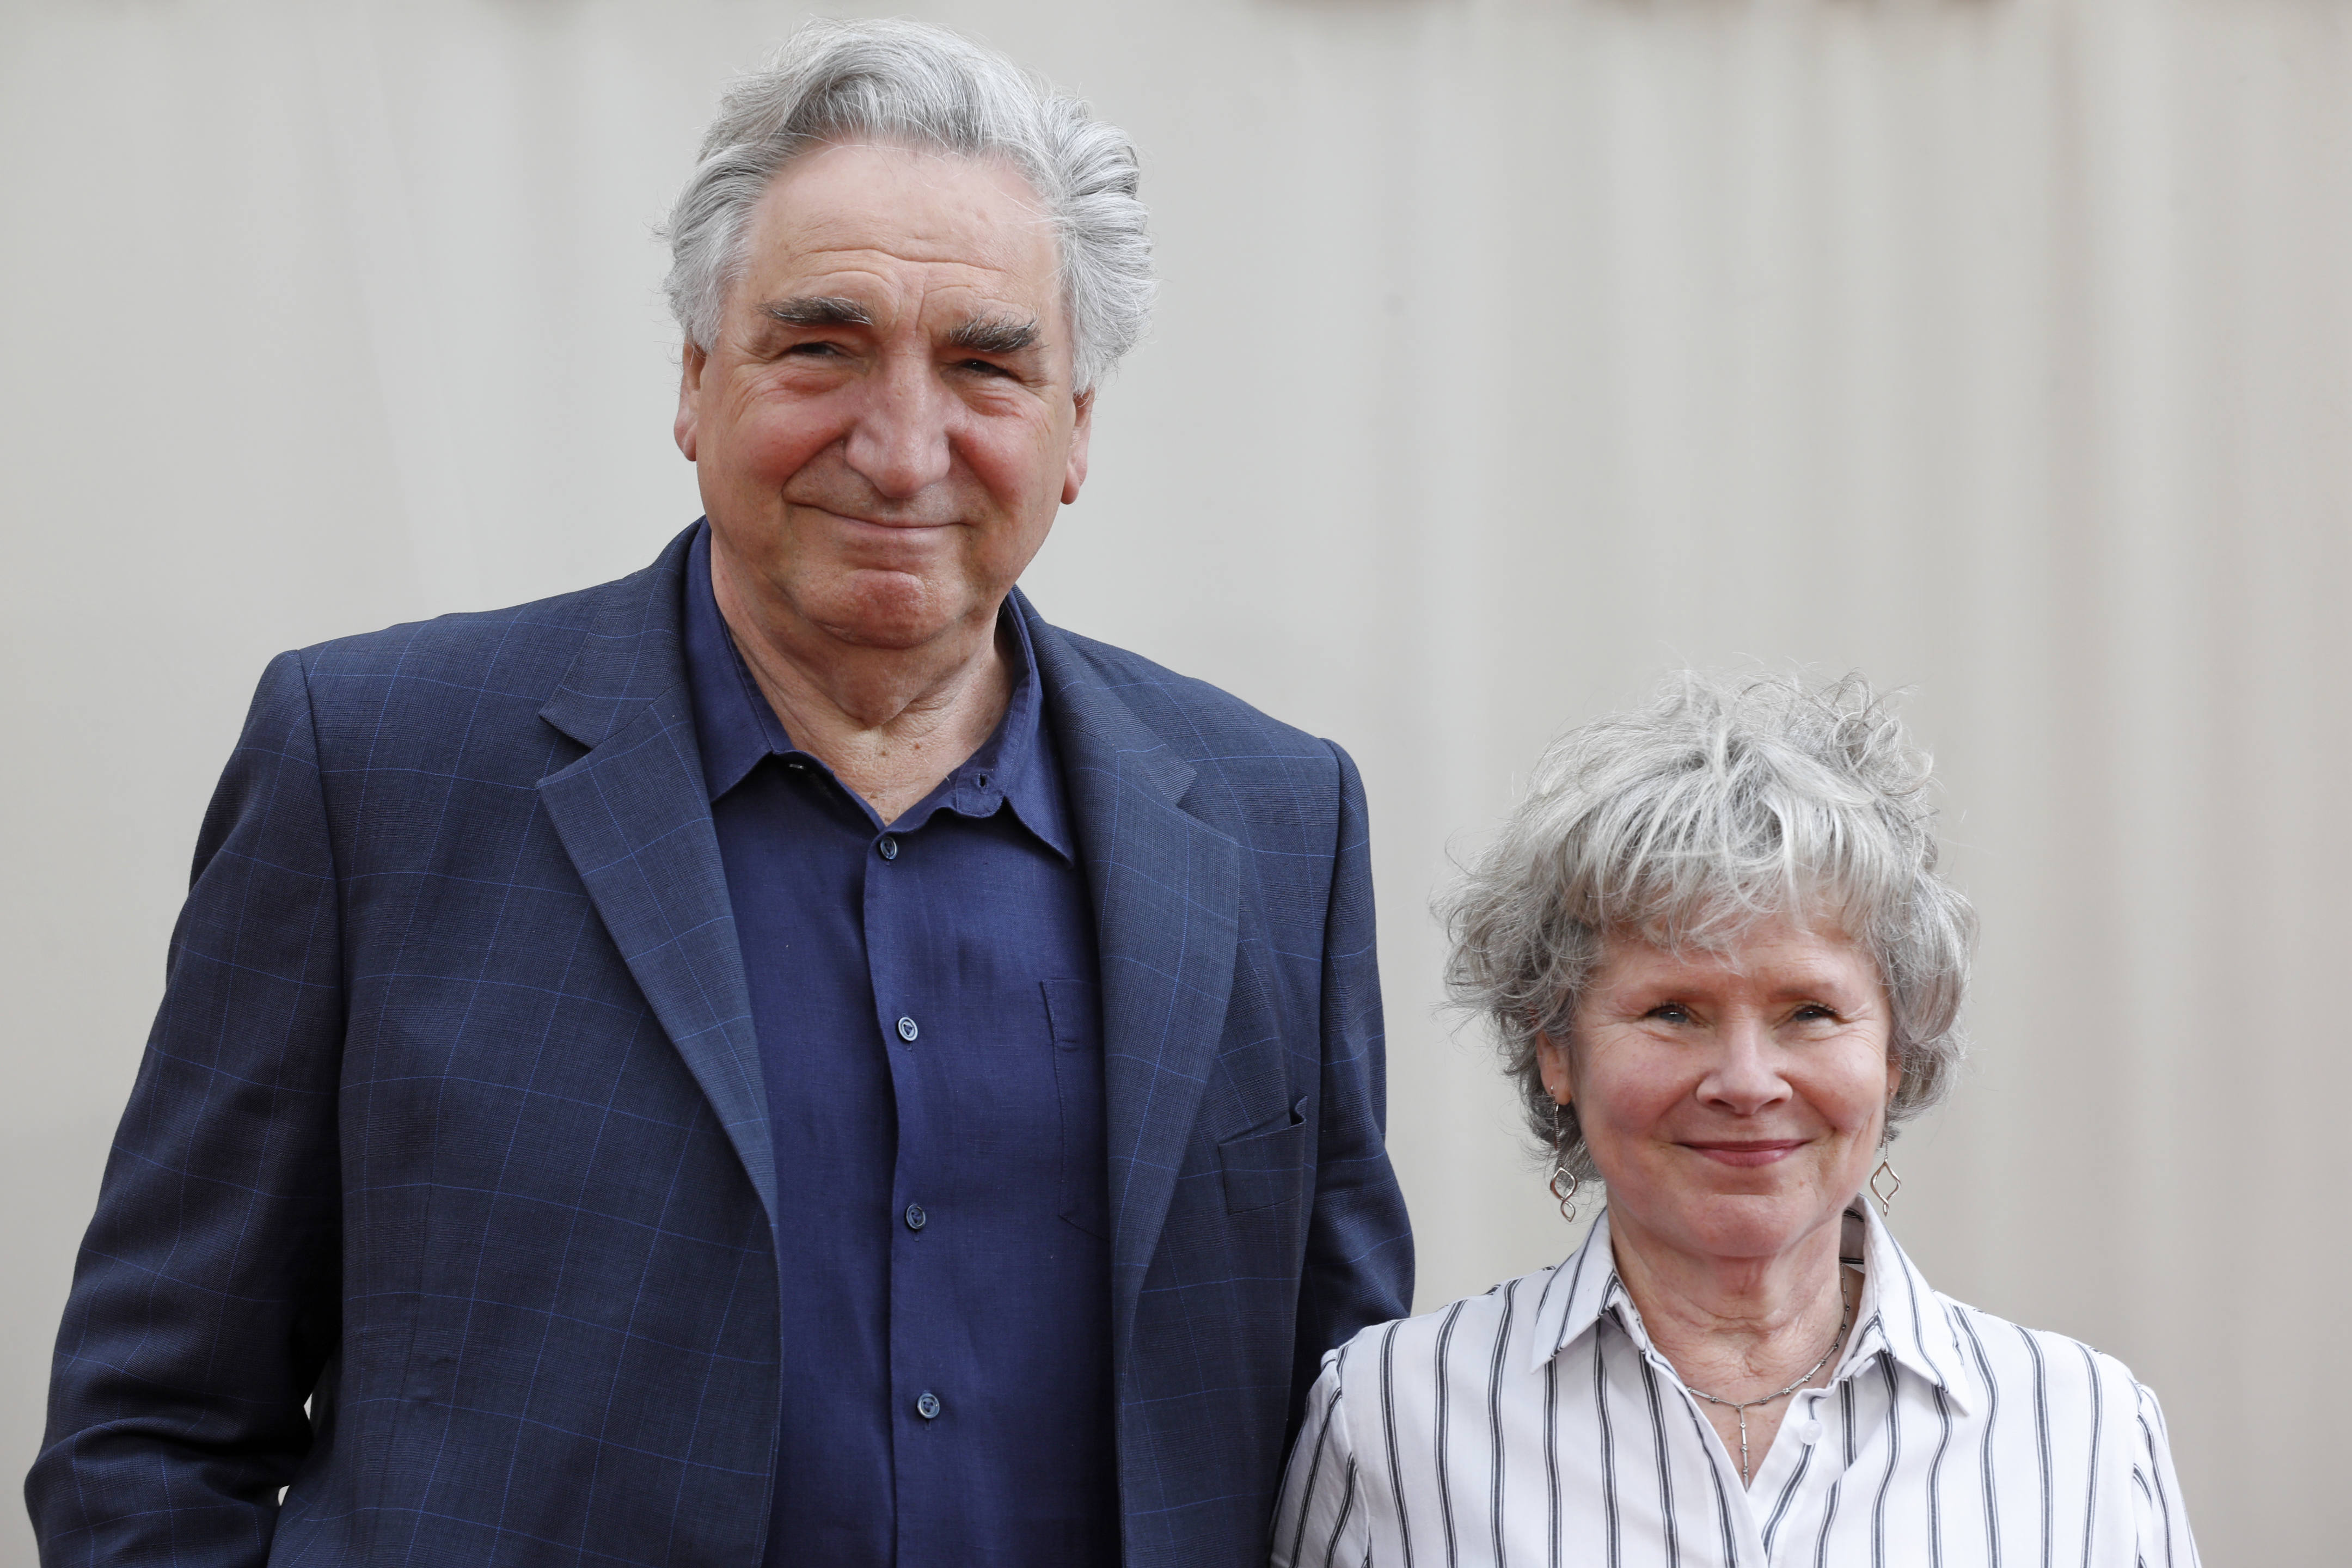 Jim Carter and Imelda Staunton at the "Downton Abbey: A New Era" world premiere hosted at Cineworld Leicester Square in London, England, on April 25, 2022. | Source: Getty Images